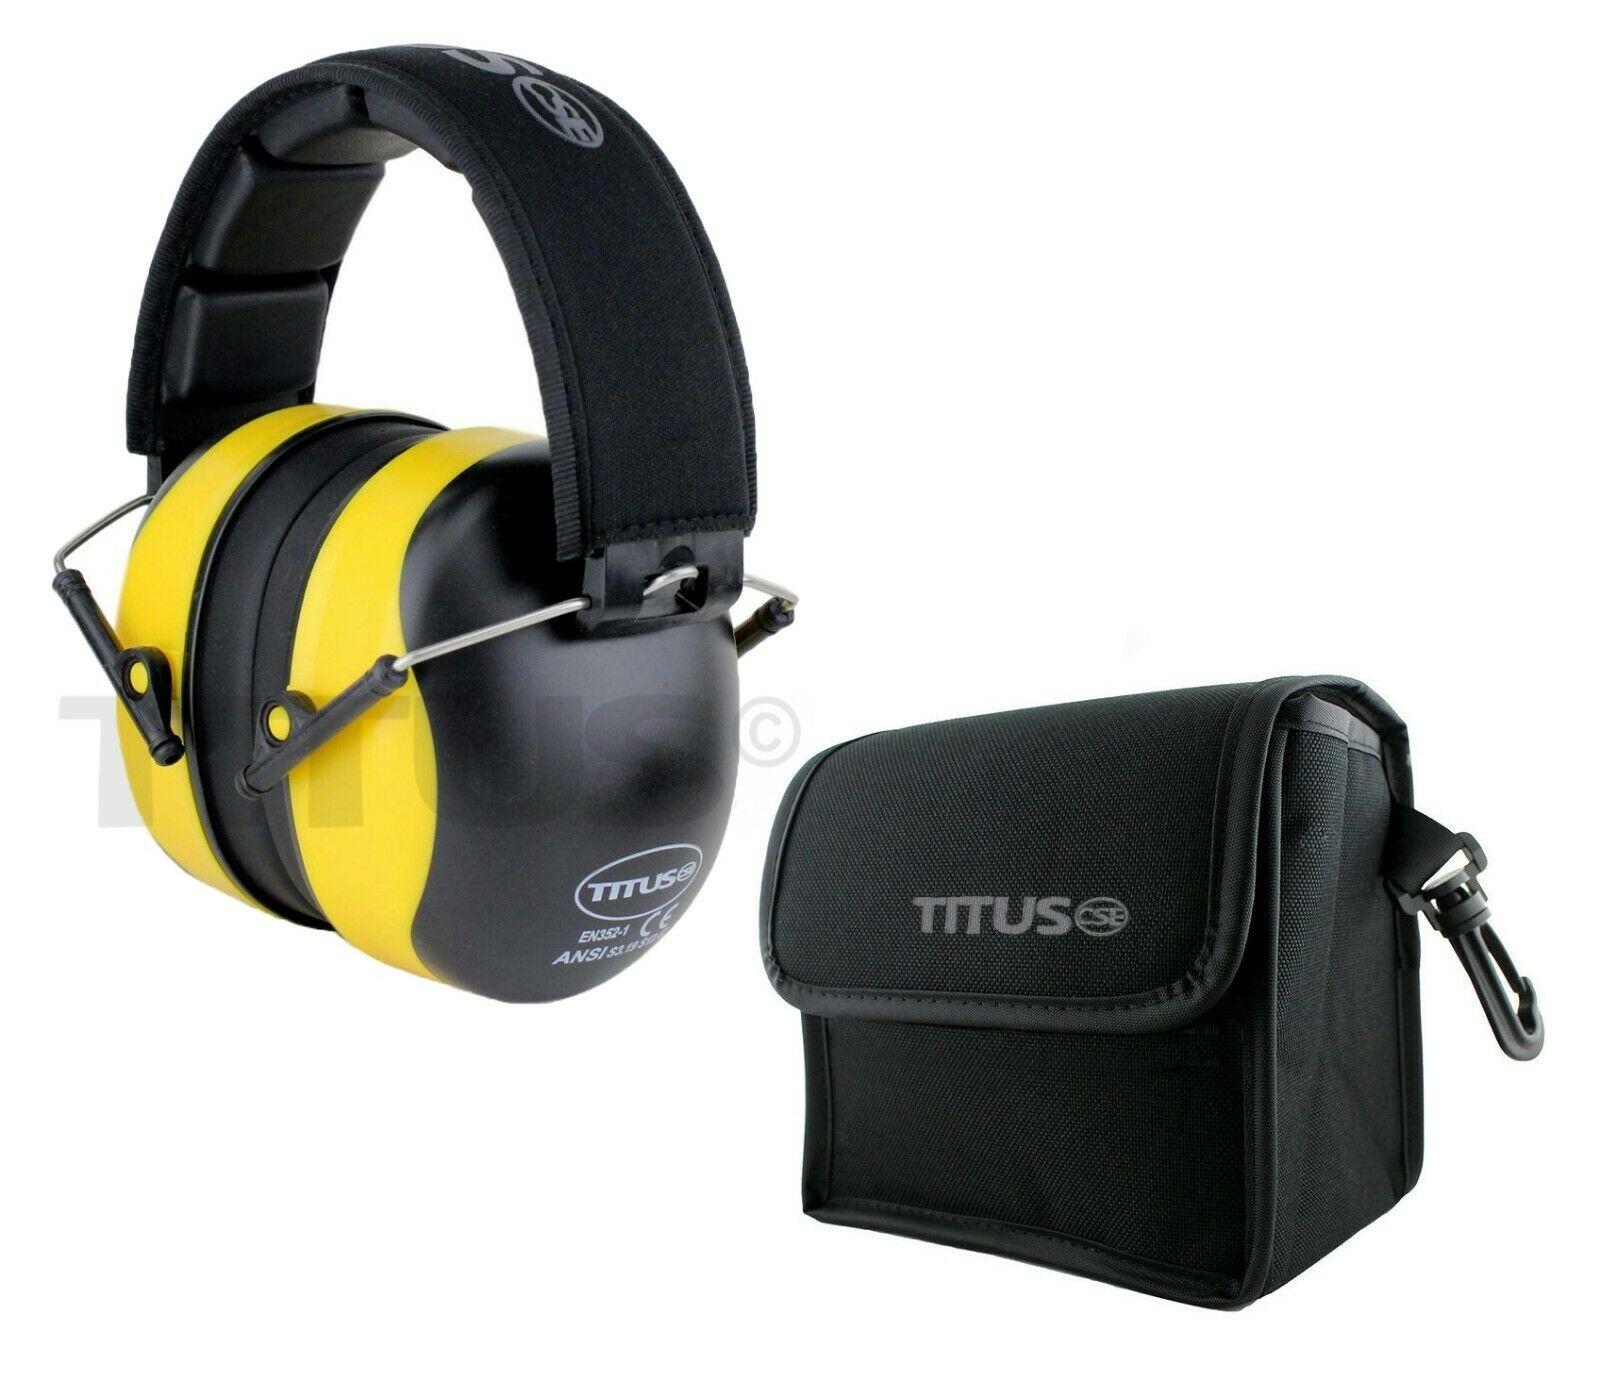 Premium Titus 37 Nrr Ear Muff Hearing Protection Noise Reduction & Case Organic